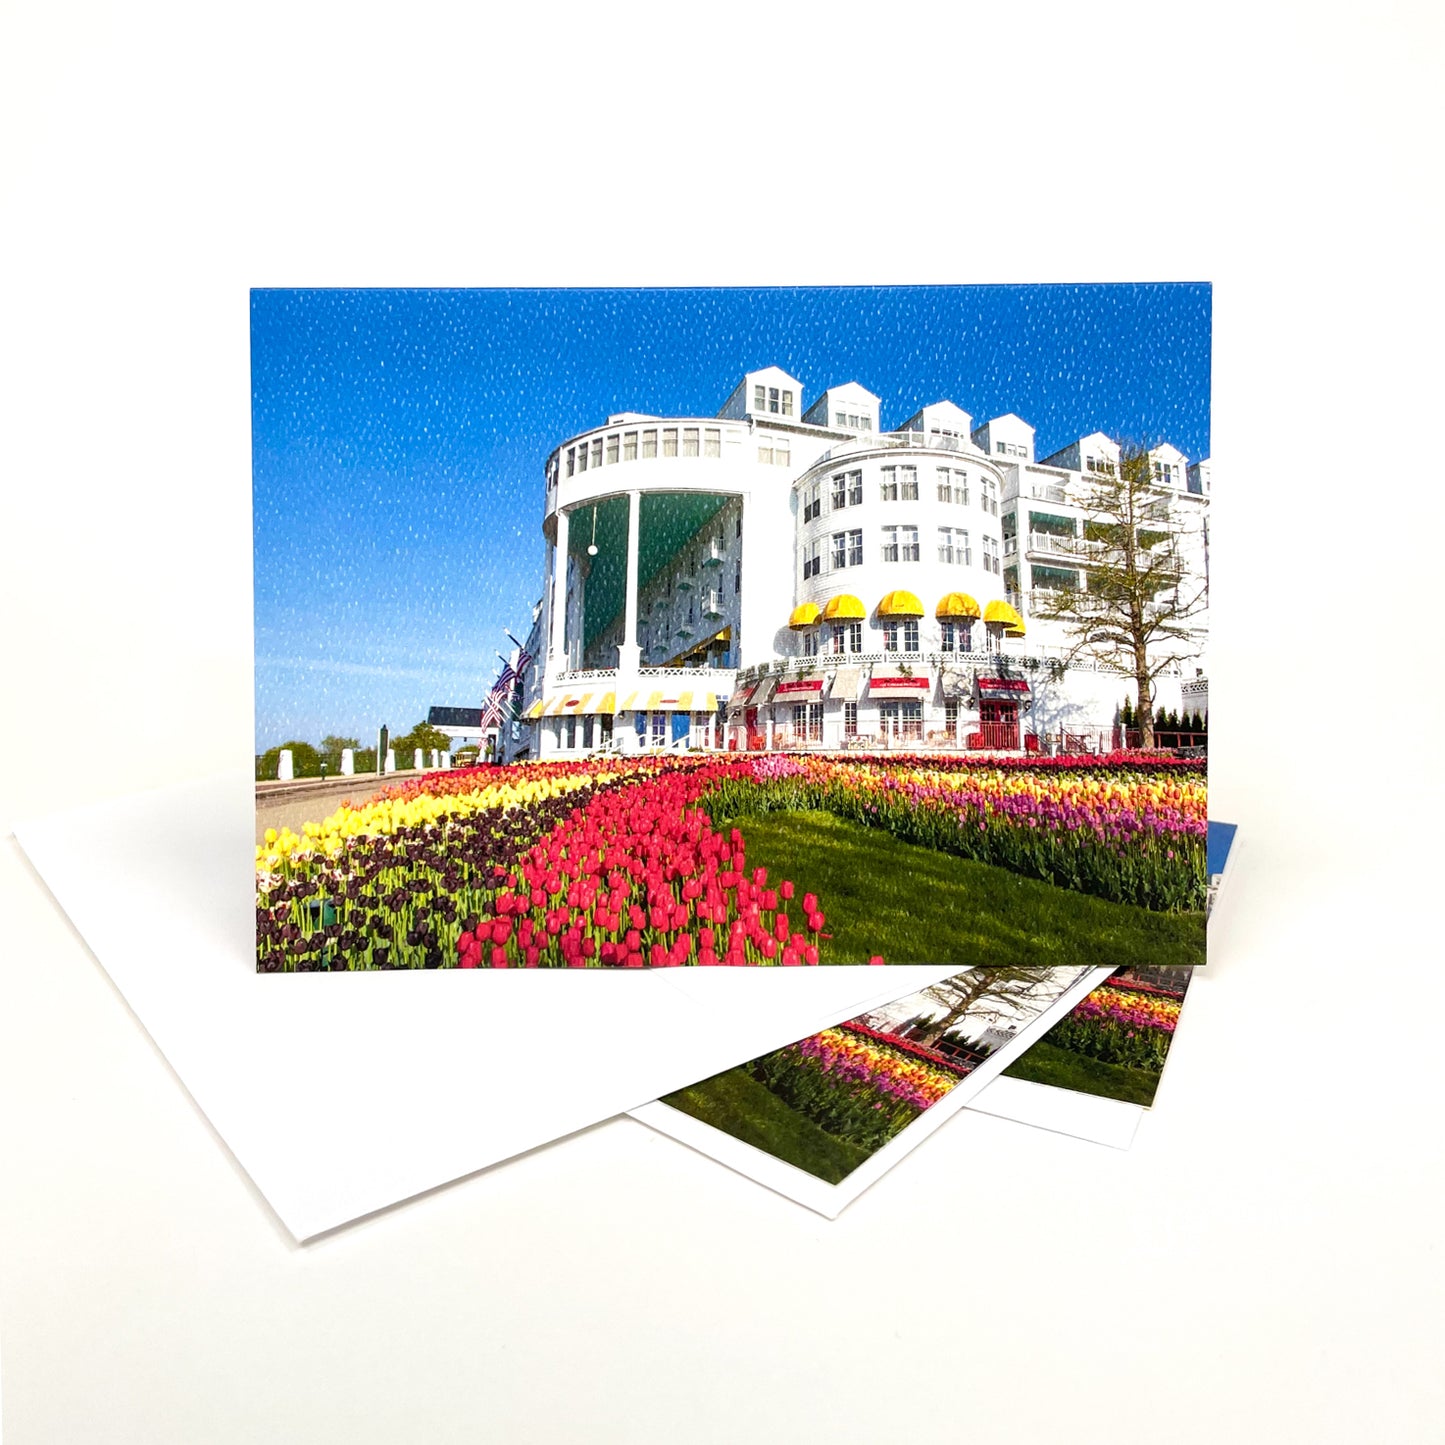 Blank greeting card featuring a photograph of tulips blooming at the Grand Hotel on Mackinac Island by local artist Jennifer Wohletz of Mackinac Memories. 